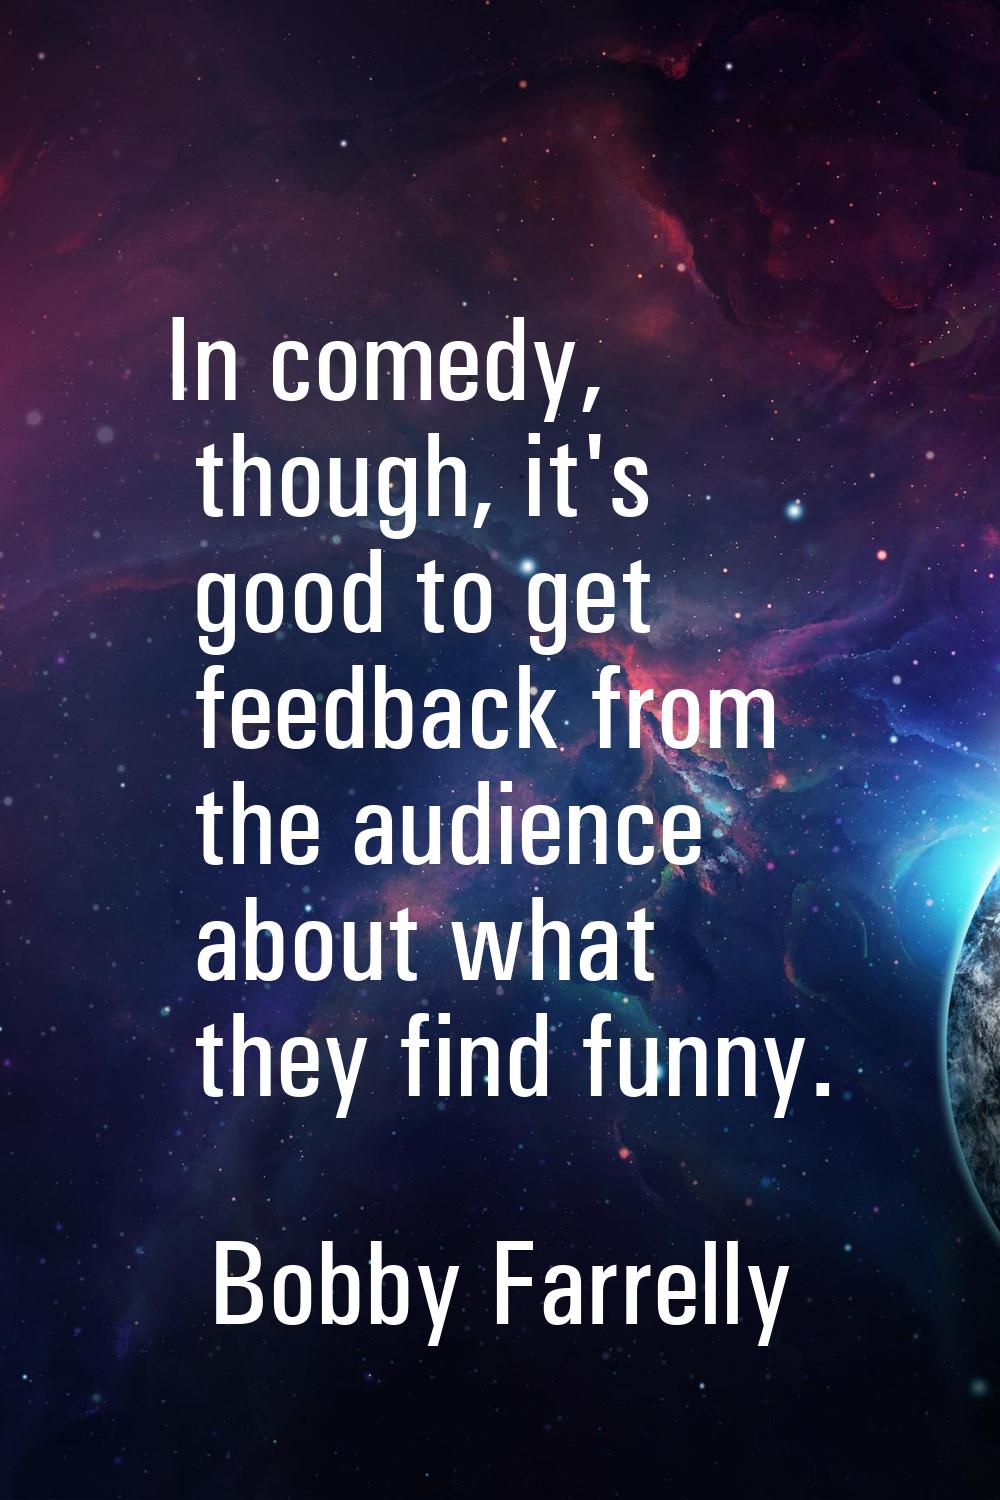 In comedy, though, it's good to get feedback from the audience about what they find funny.